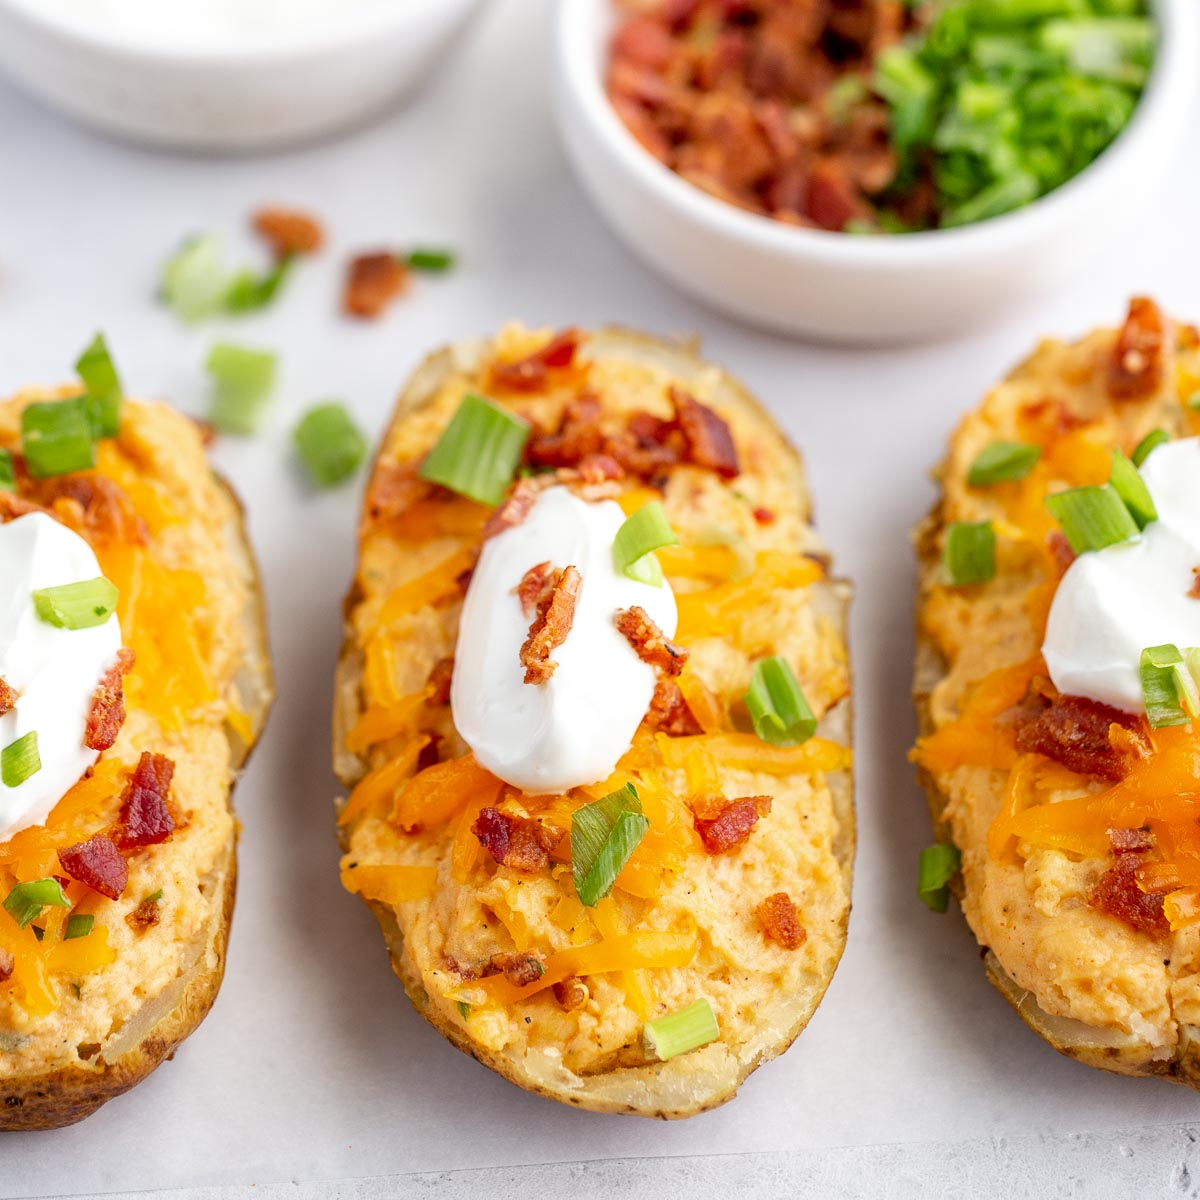 Twice baked potatoes topped with sour cream, bacon, and green onions on a gray surface with more sour cream and toppings in the background.